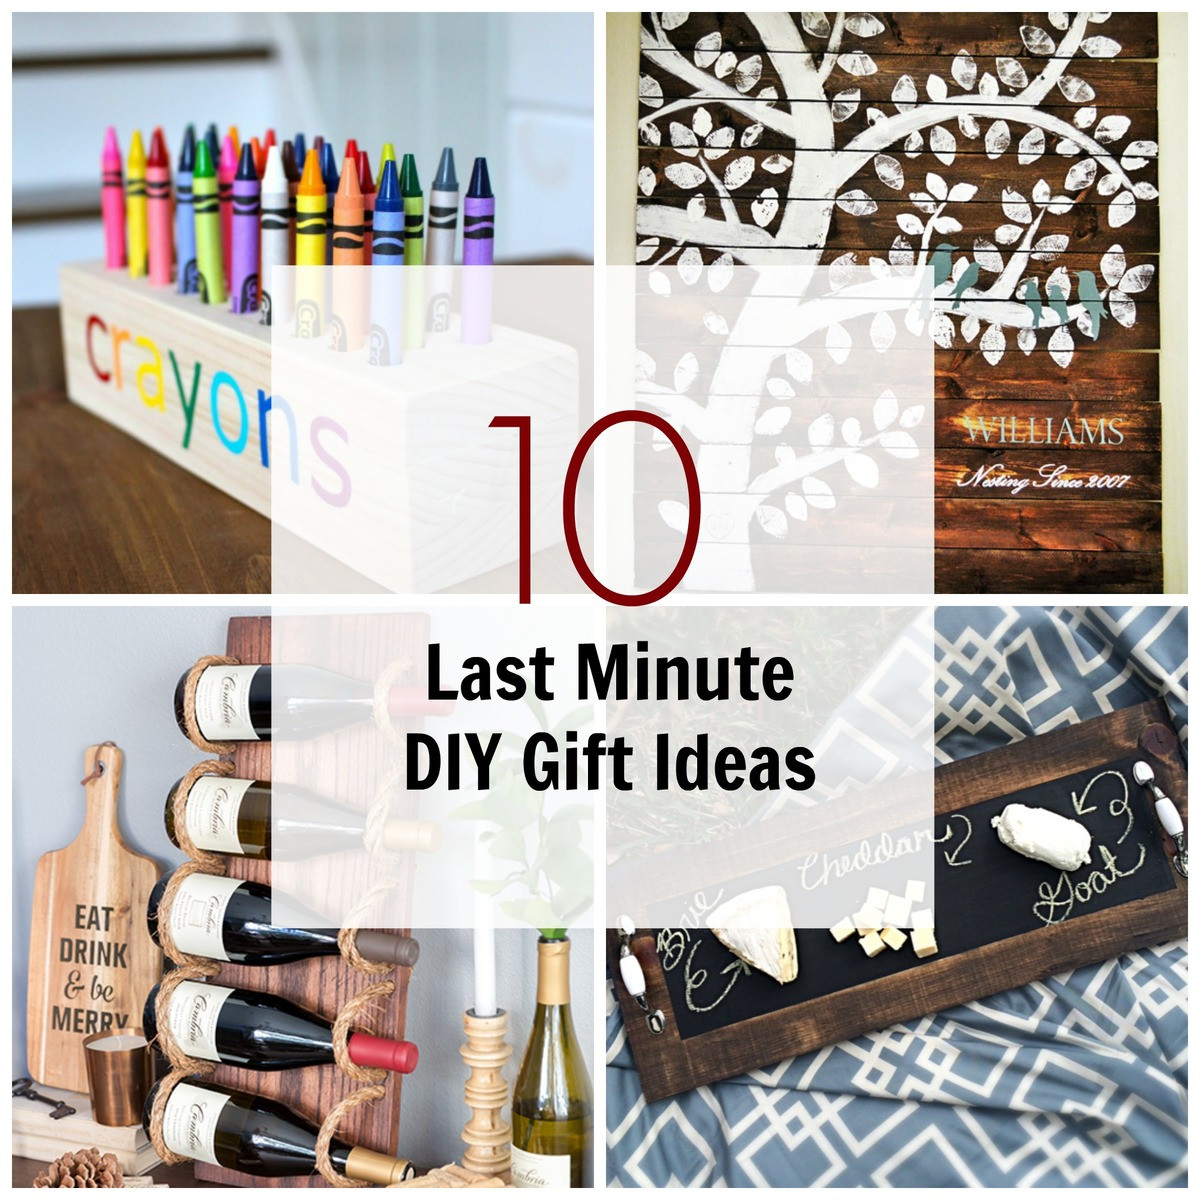 Wood Craft Gift Ideas
 10 Last Minute DIY Wood Gifts that you Can Make